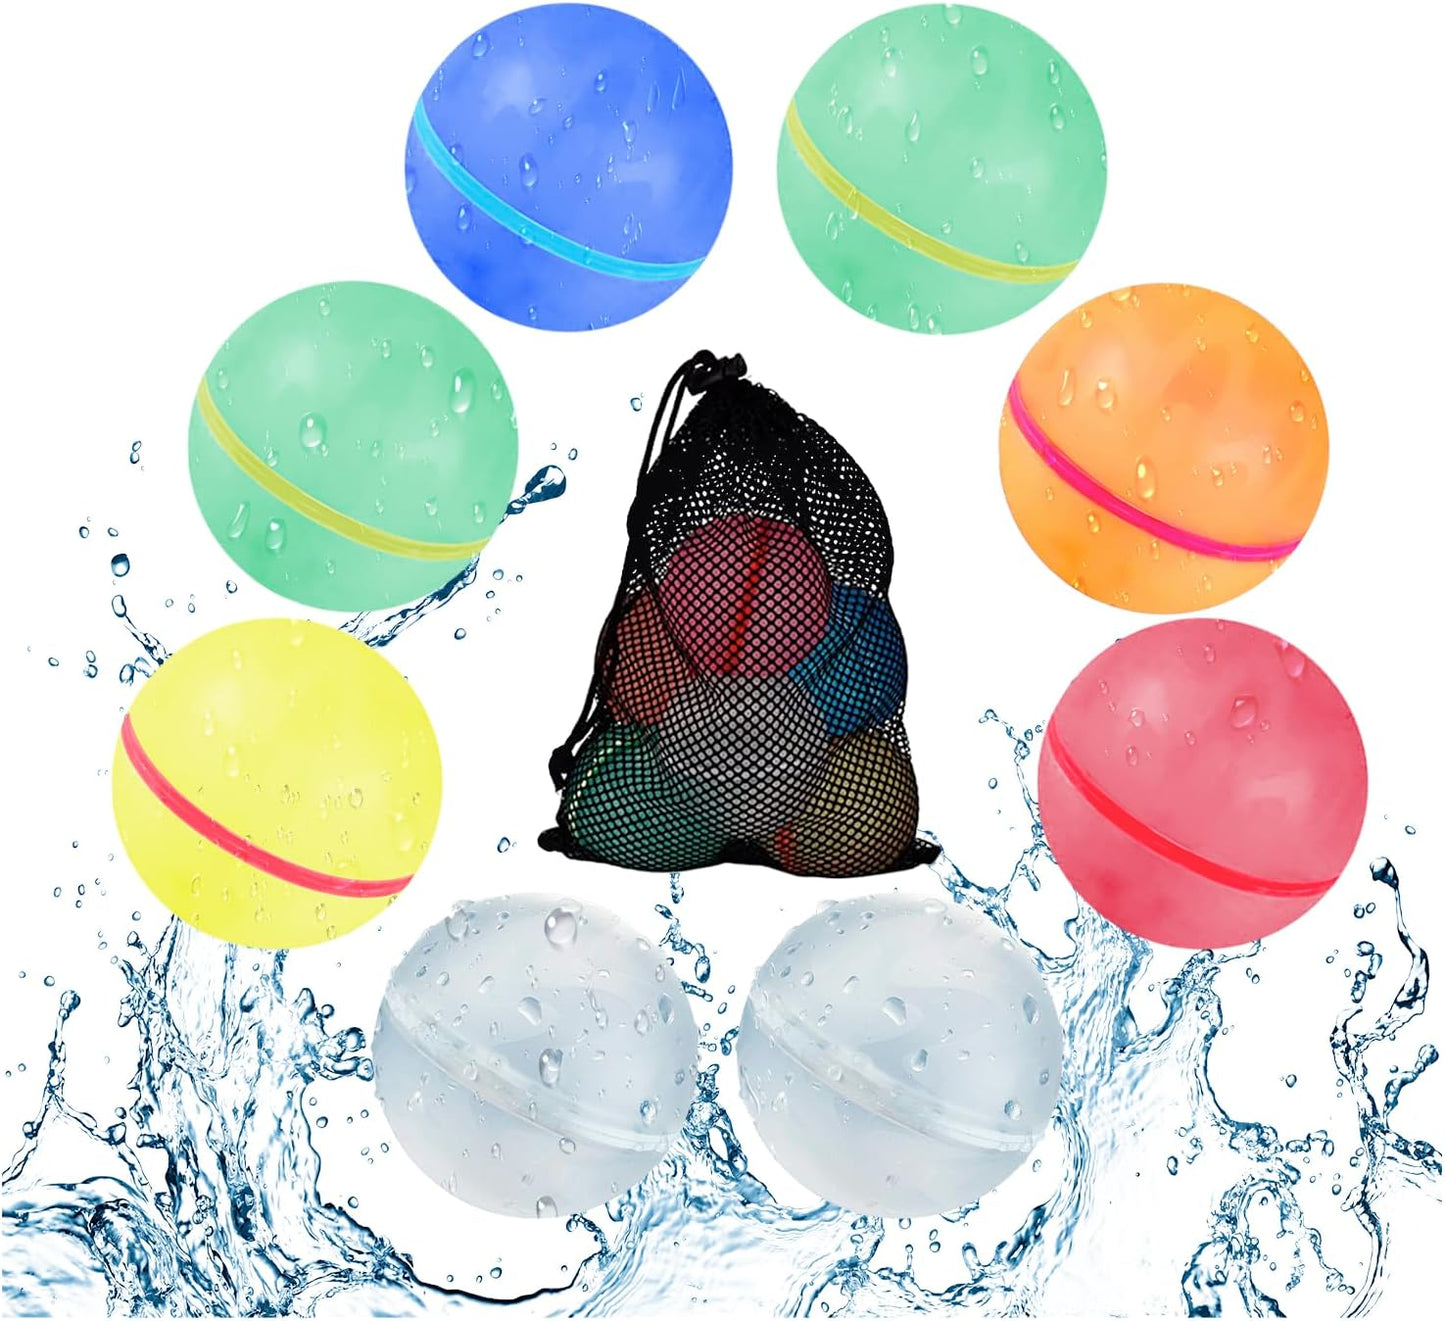 Self Sealing Reusable Water Balloons 20PCS Magnetic Water Balloons Quick Filling Water Balls Toys Silicone Water Splash Ball Water Bomb Cool Toys,Summer Pool Beach Outdoor Toys for Kids Ages 3 4 8 12+